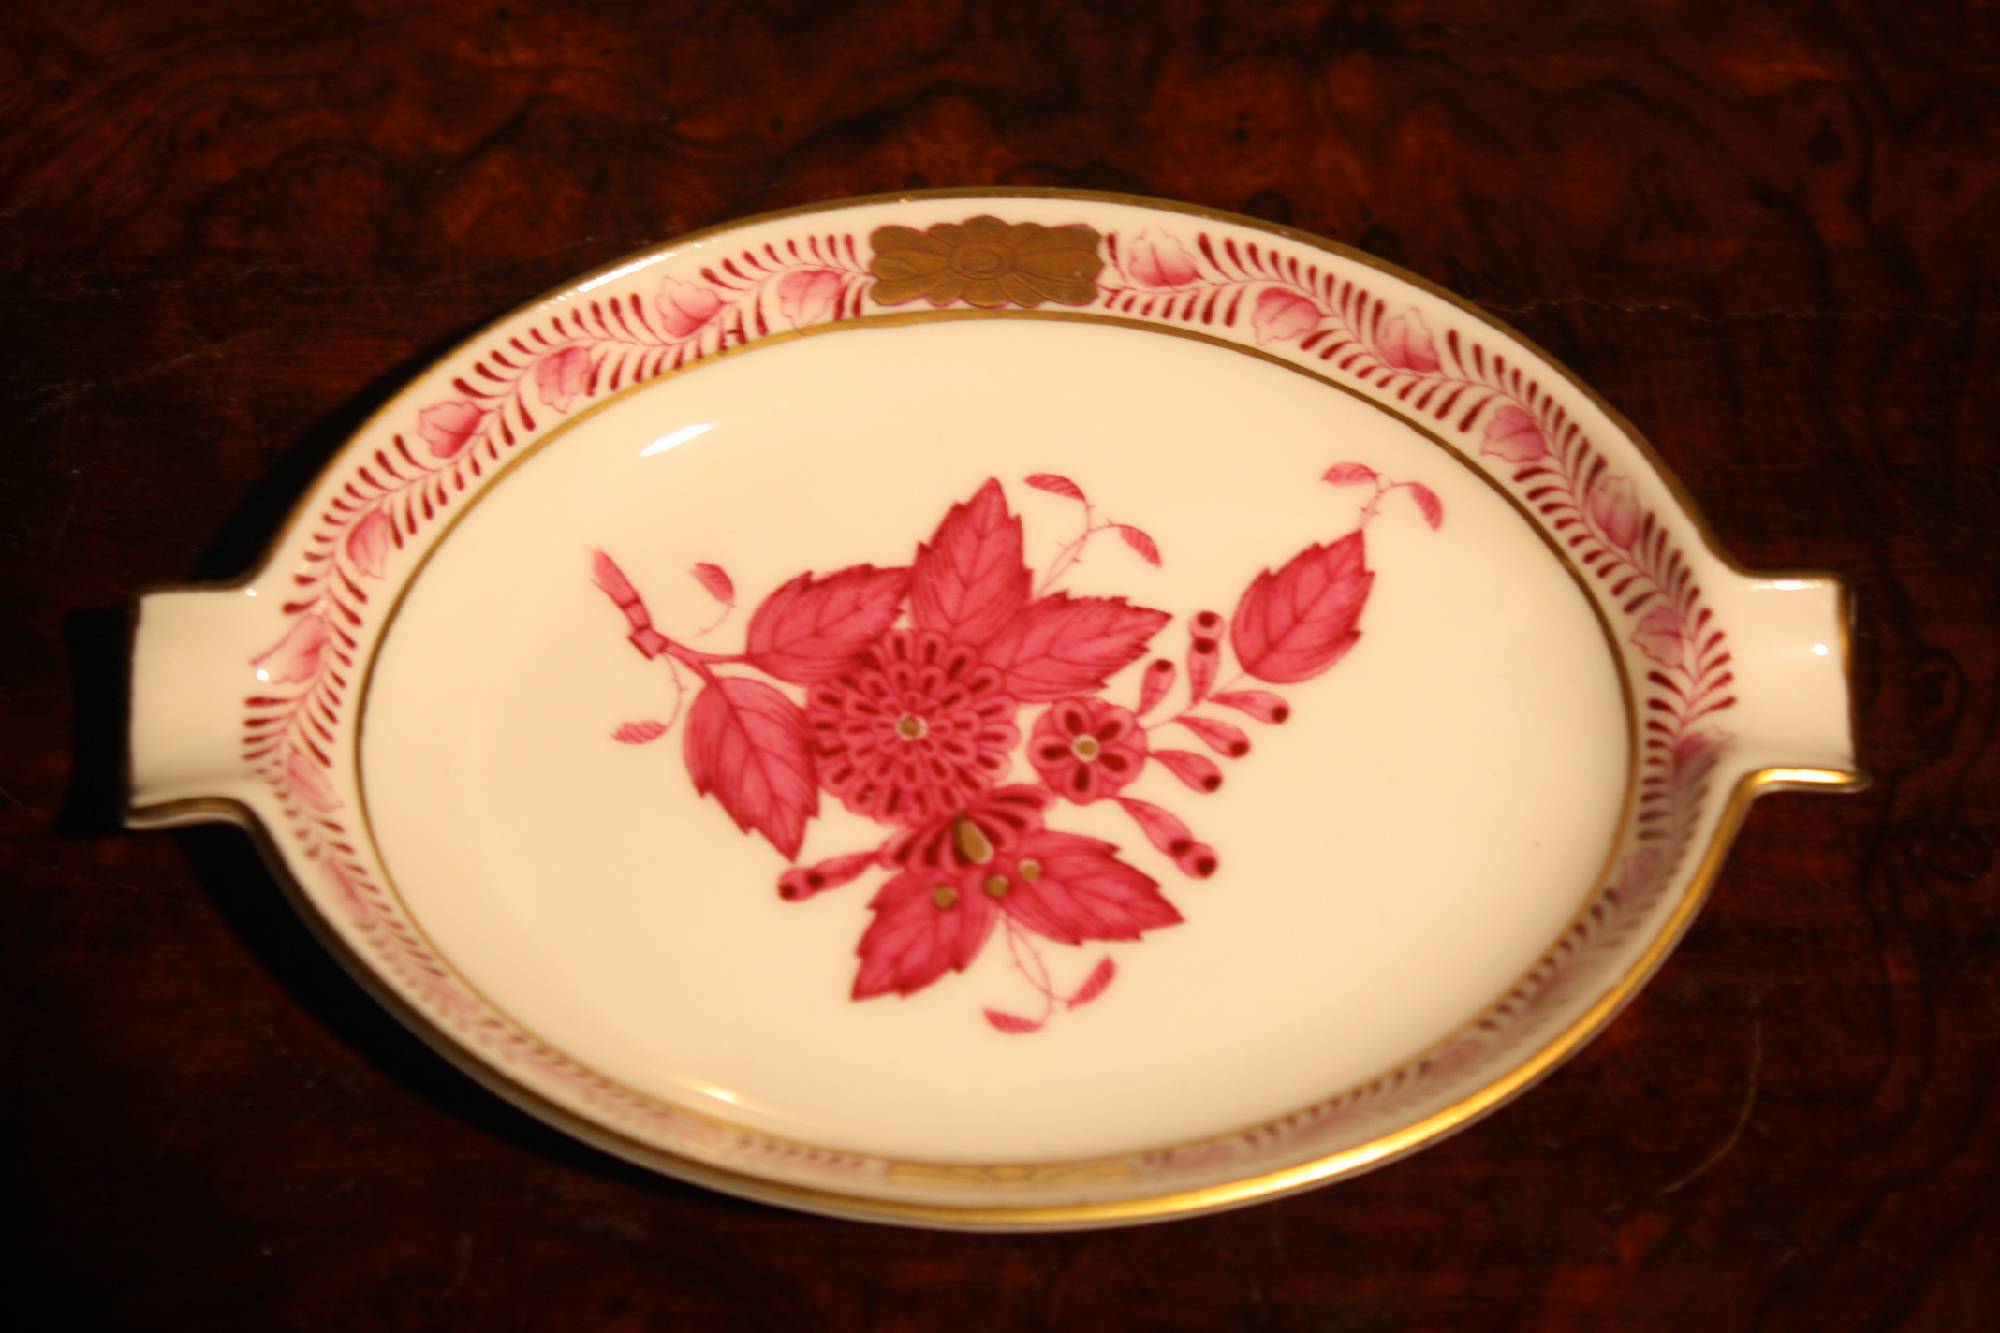 Small European rosé flowers ornate porcelain ash tray by Herend, Hungary, 20th century